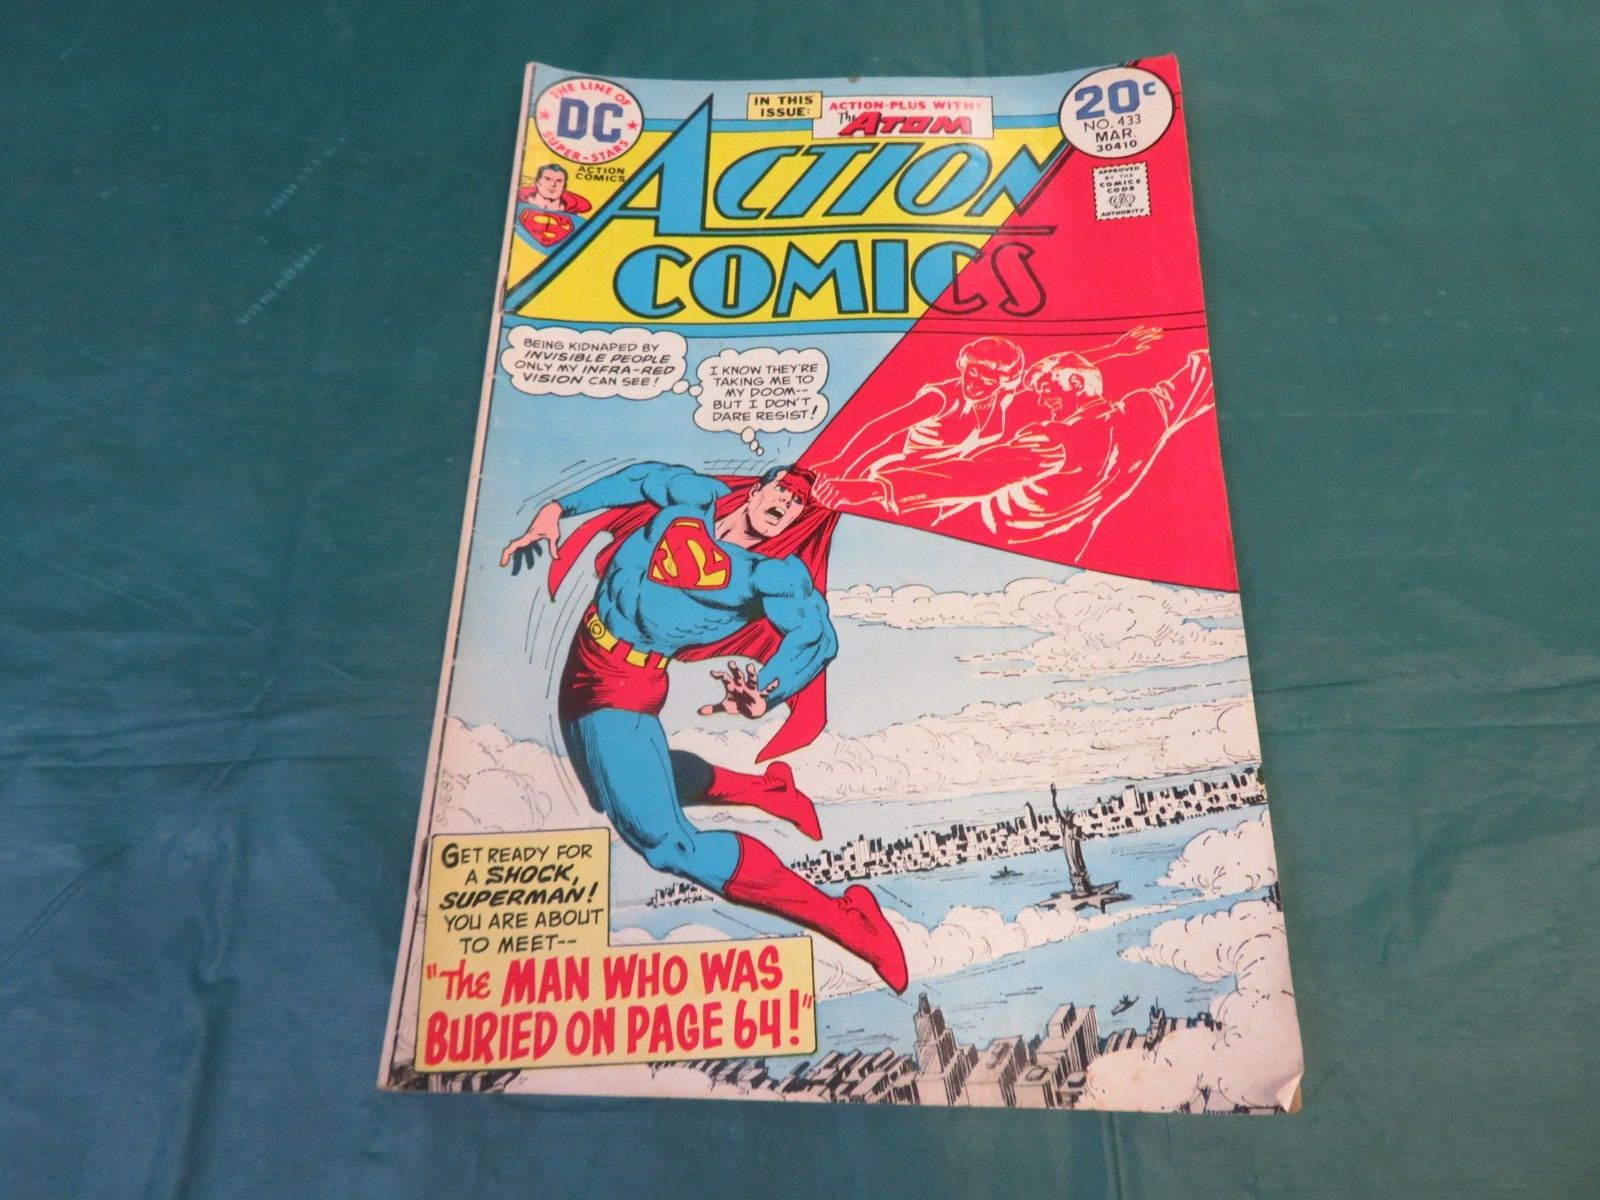 March 1974 DC Comics: Action Comics #433 *Superman - Man Buried On Page 64